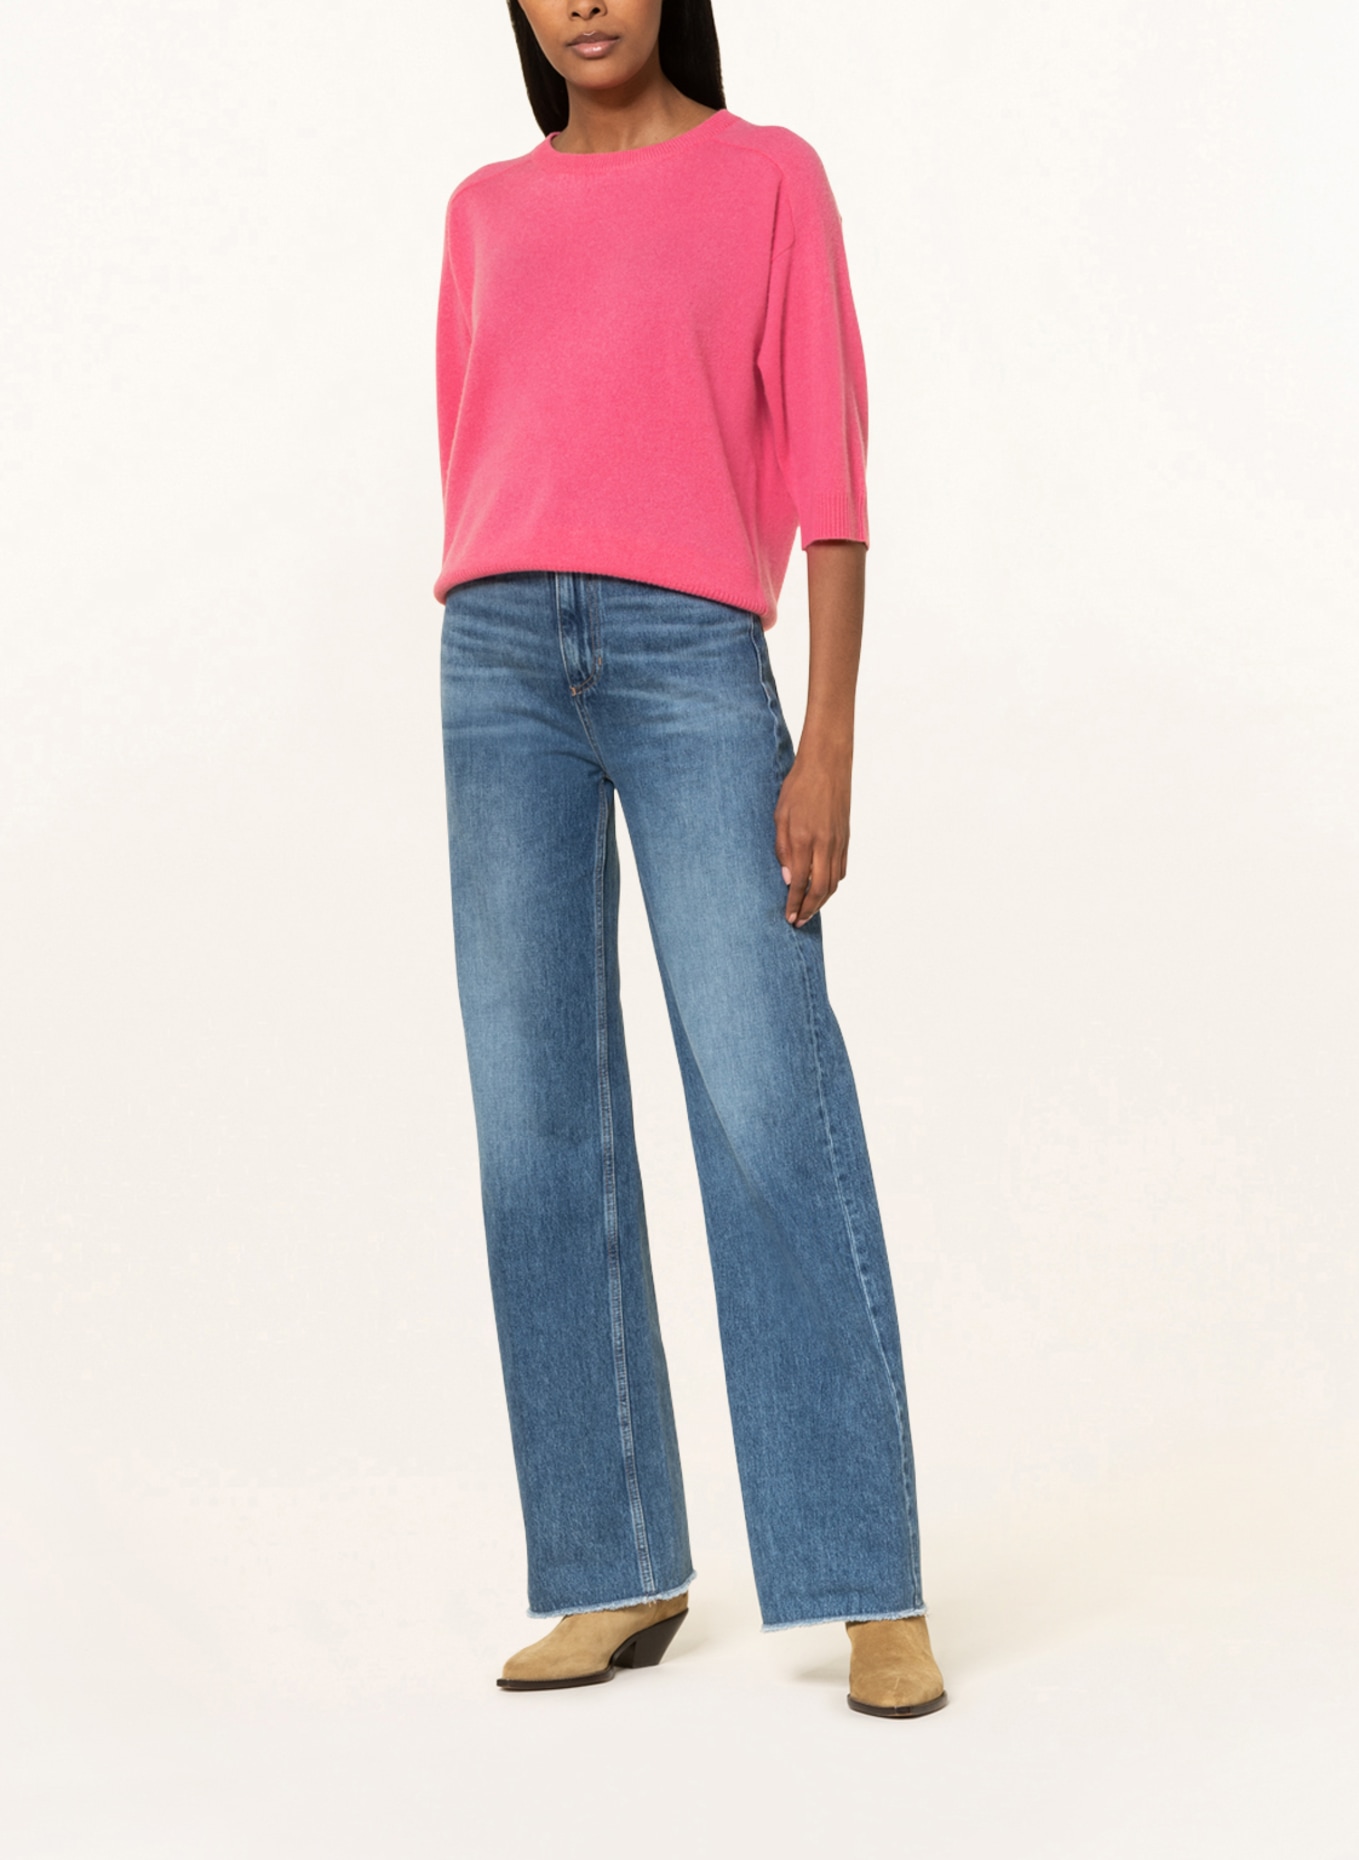 HEMISPHERE Cashmere sweater with 3/4 sleeves, Color: PINK (Image 2)